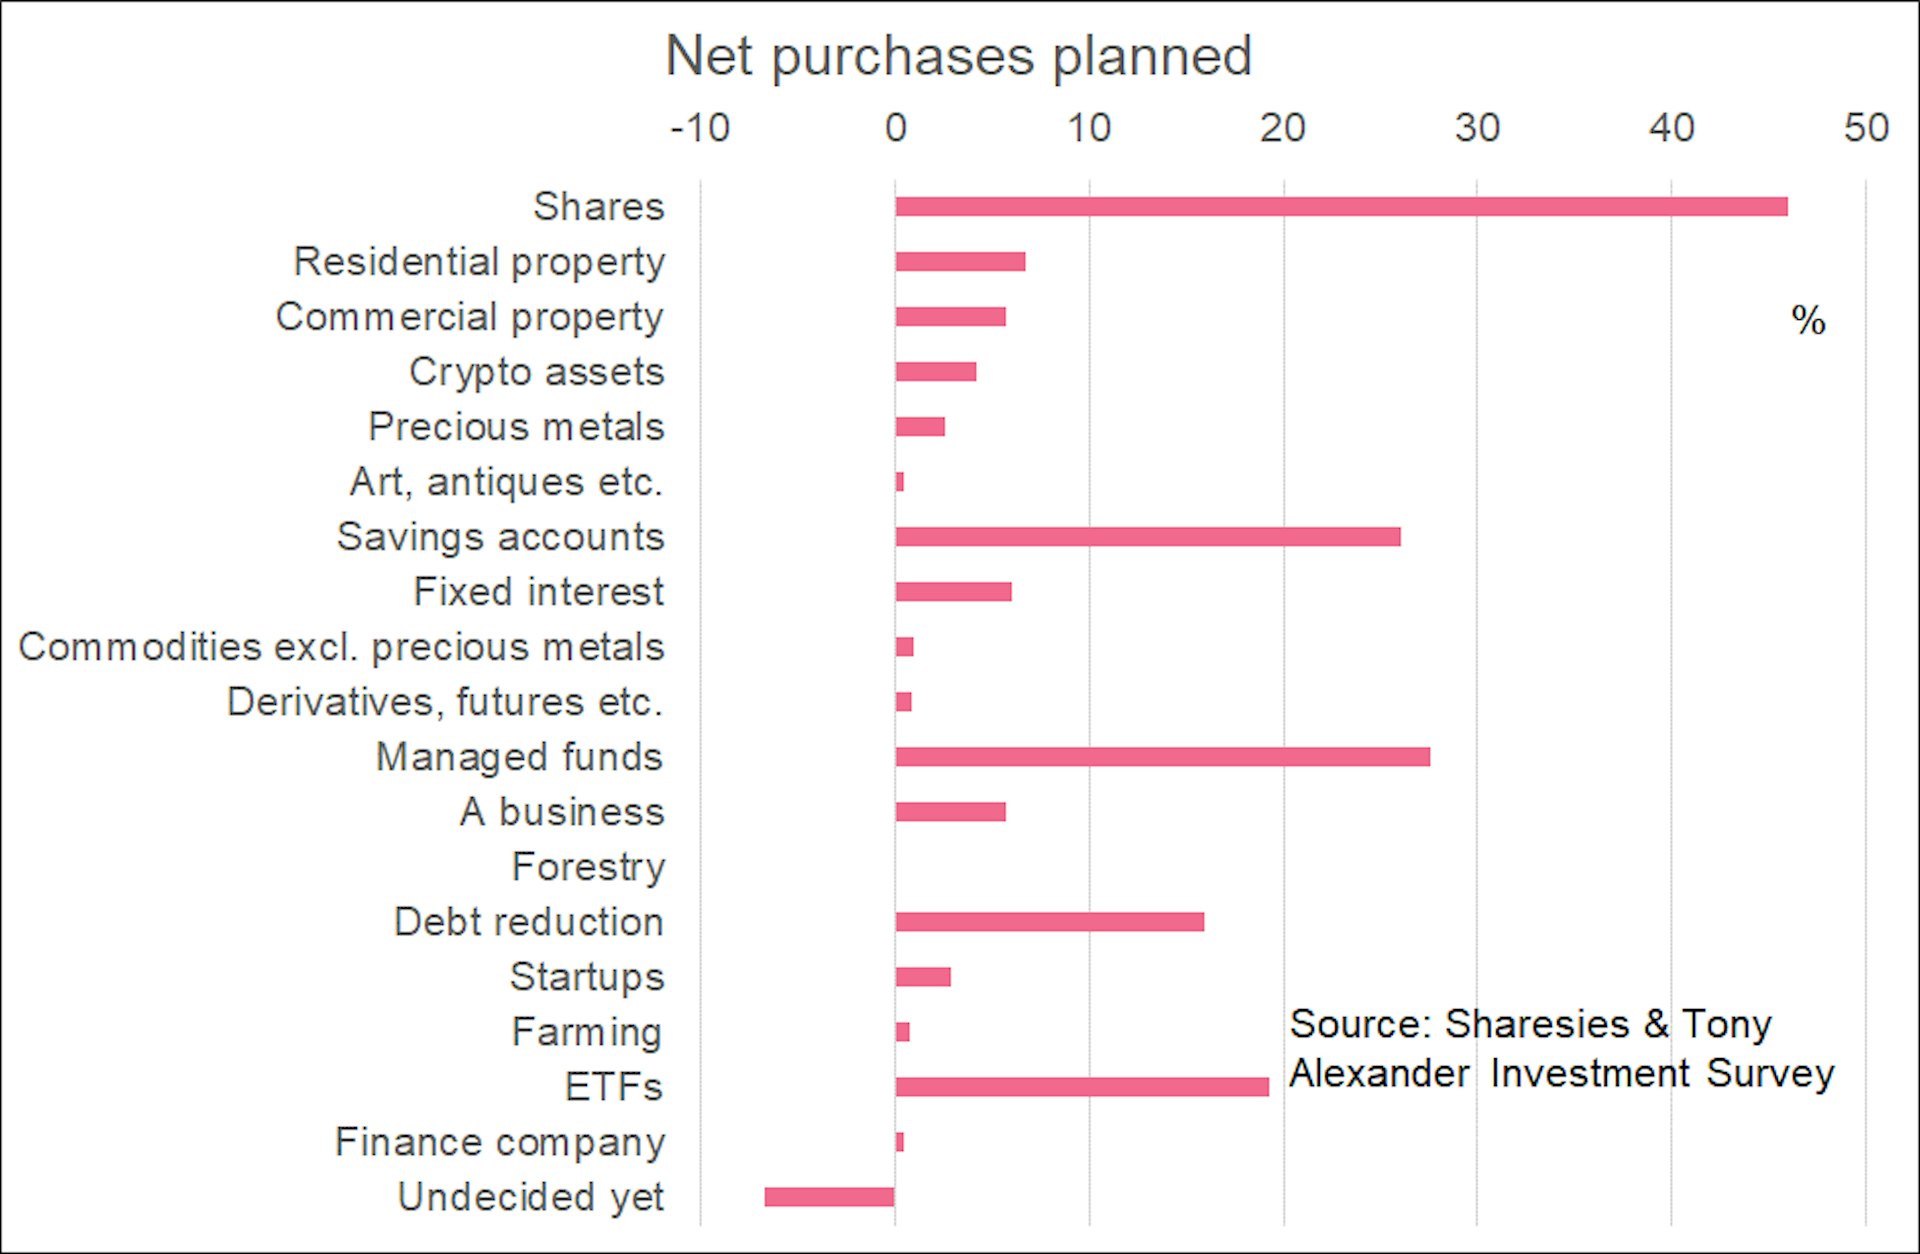 A vertical bar graph illustrates survey respondents' net purchases planned. It shows that the net intention to purchase shares vastly exceeds any other asset type.